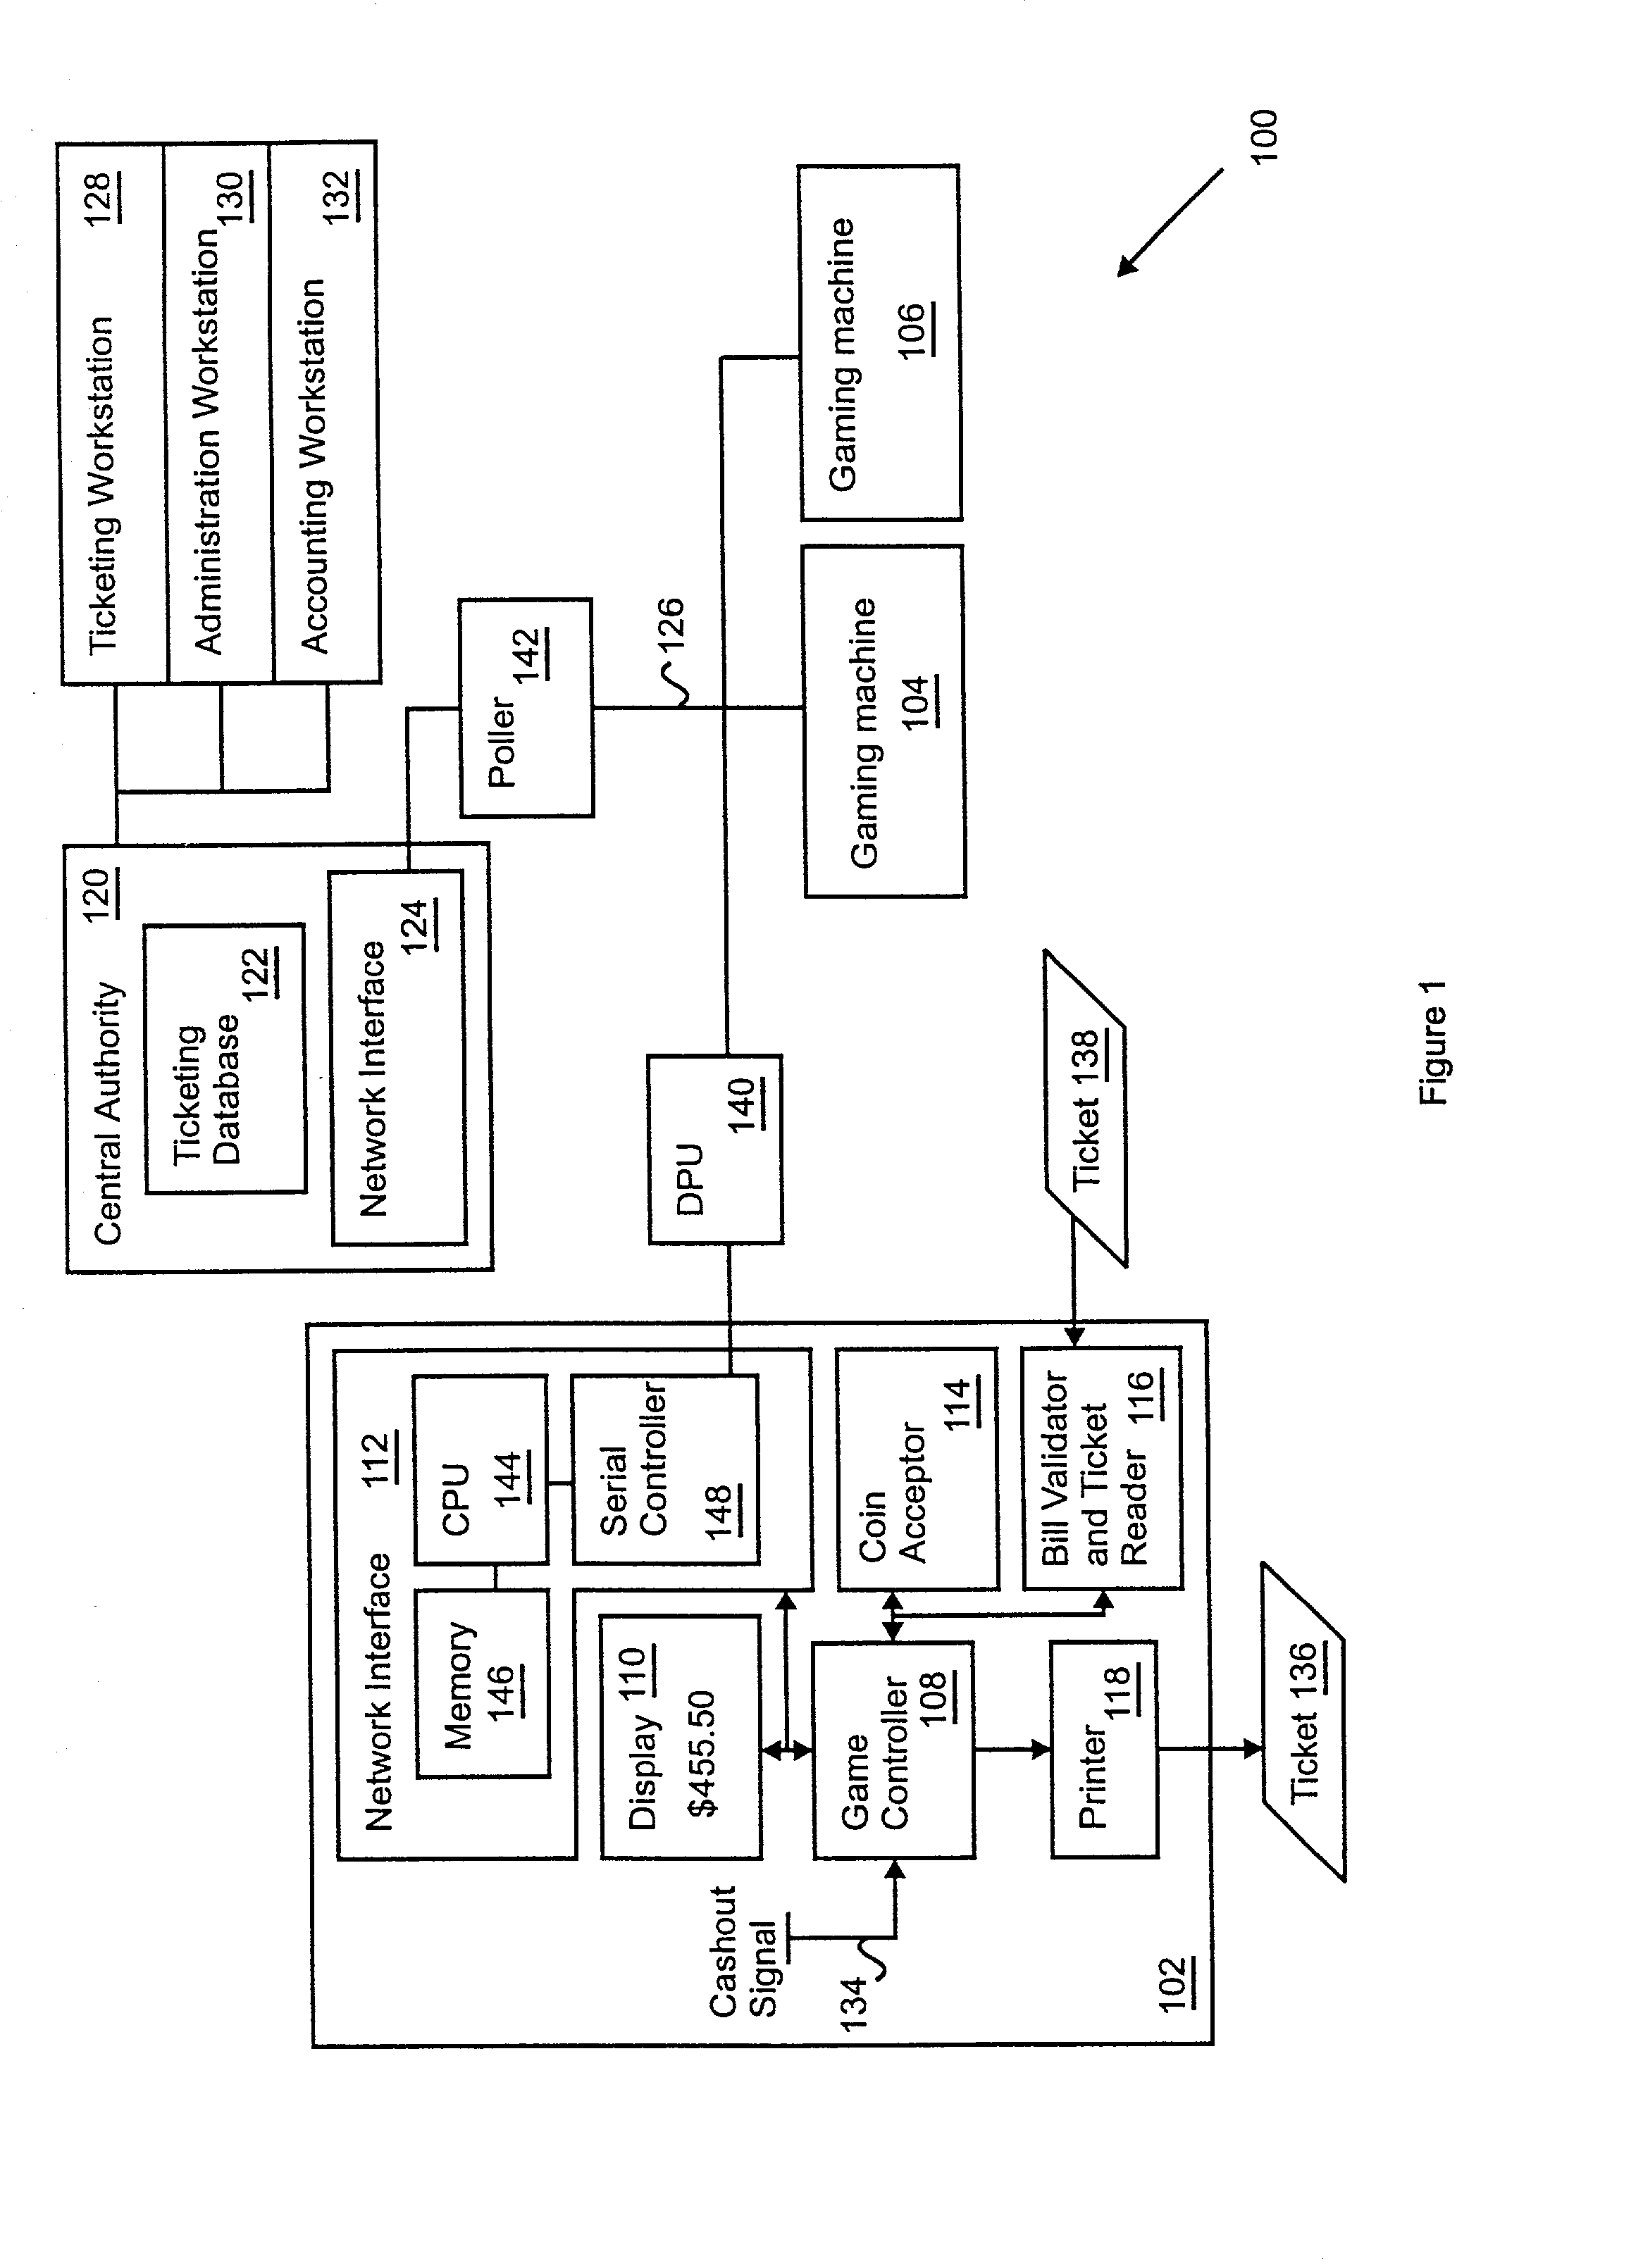 Apparatus and method for a cashless actuated gaming system